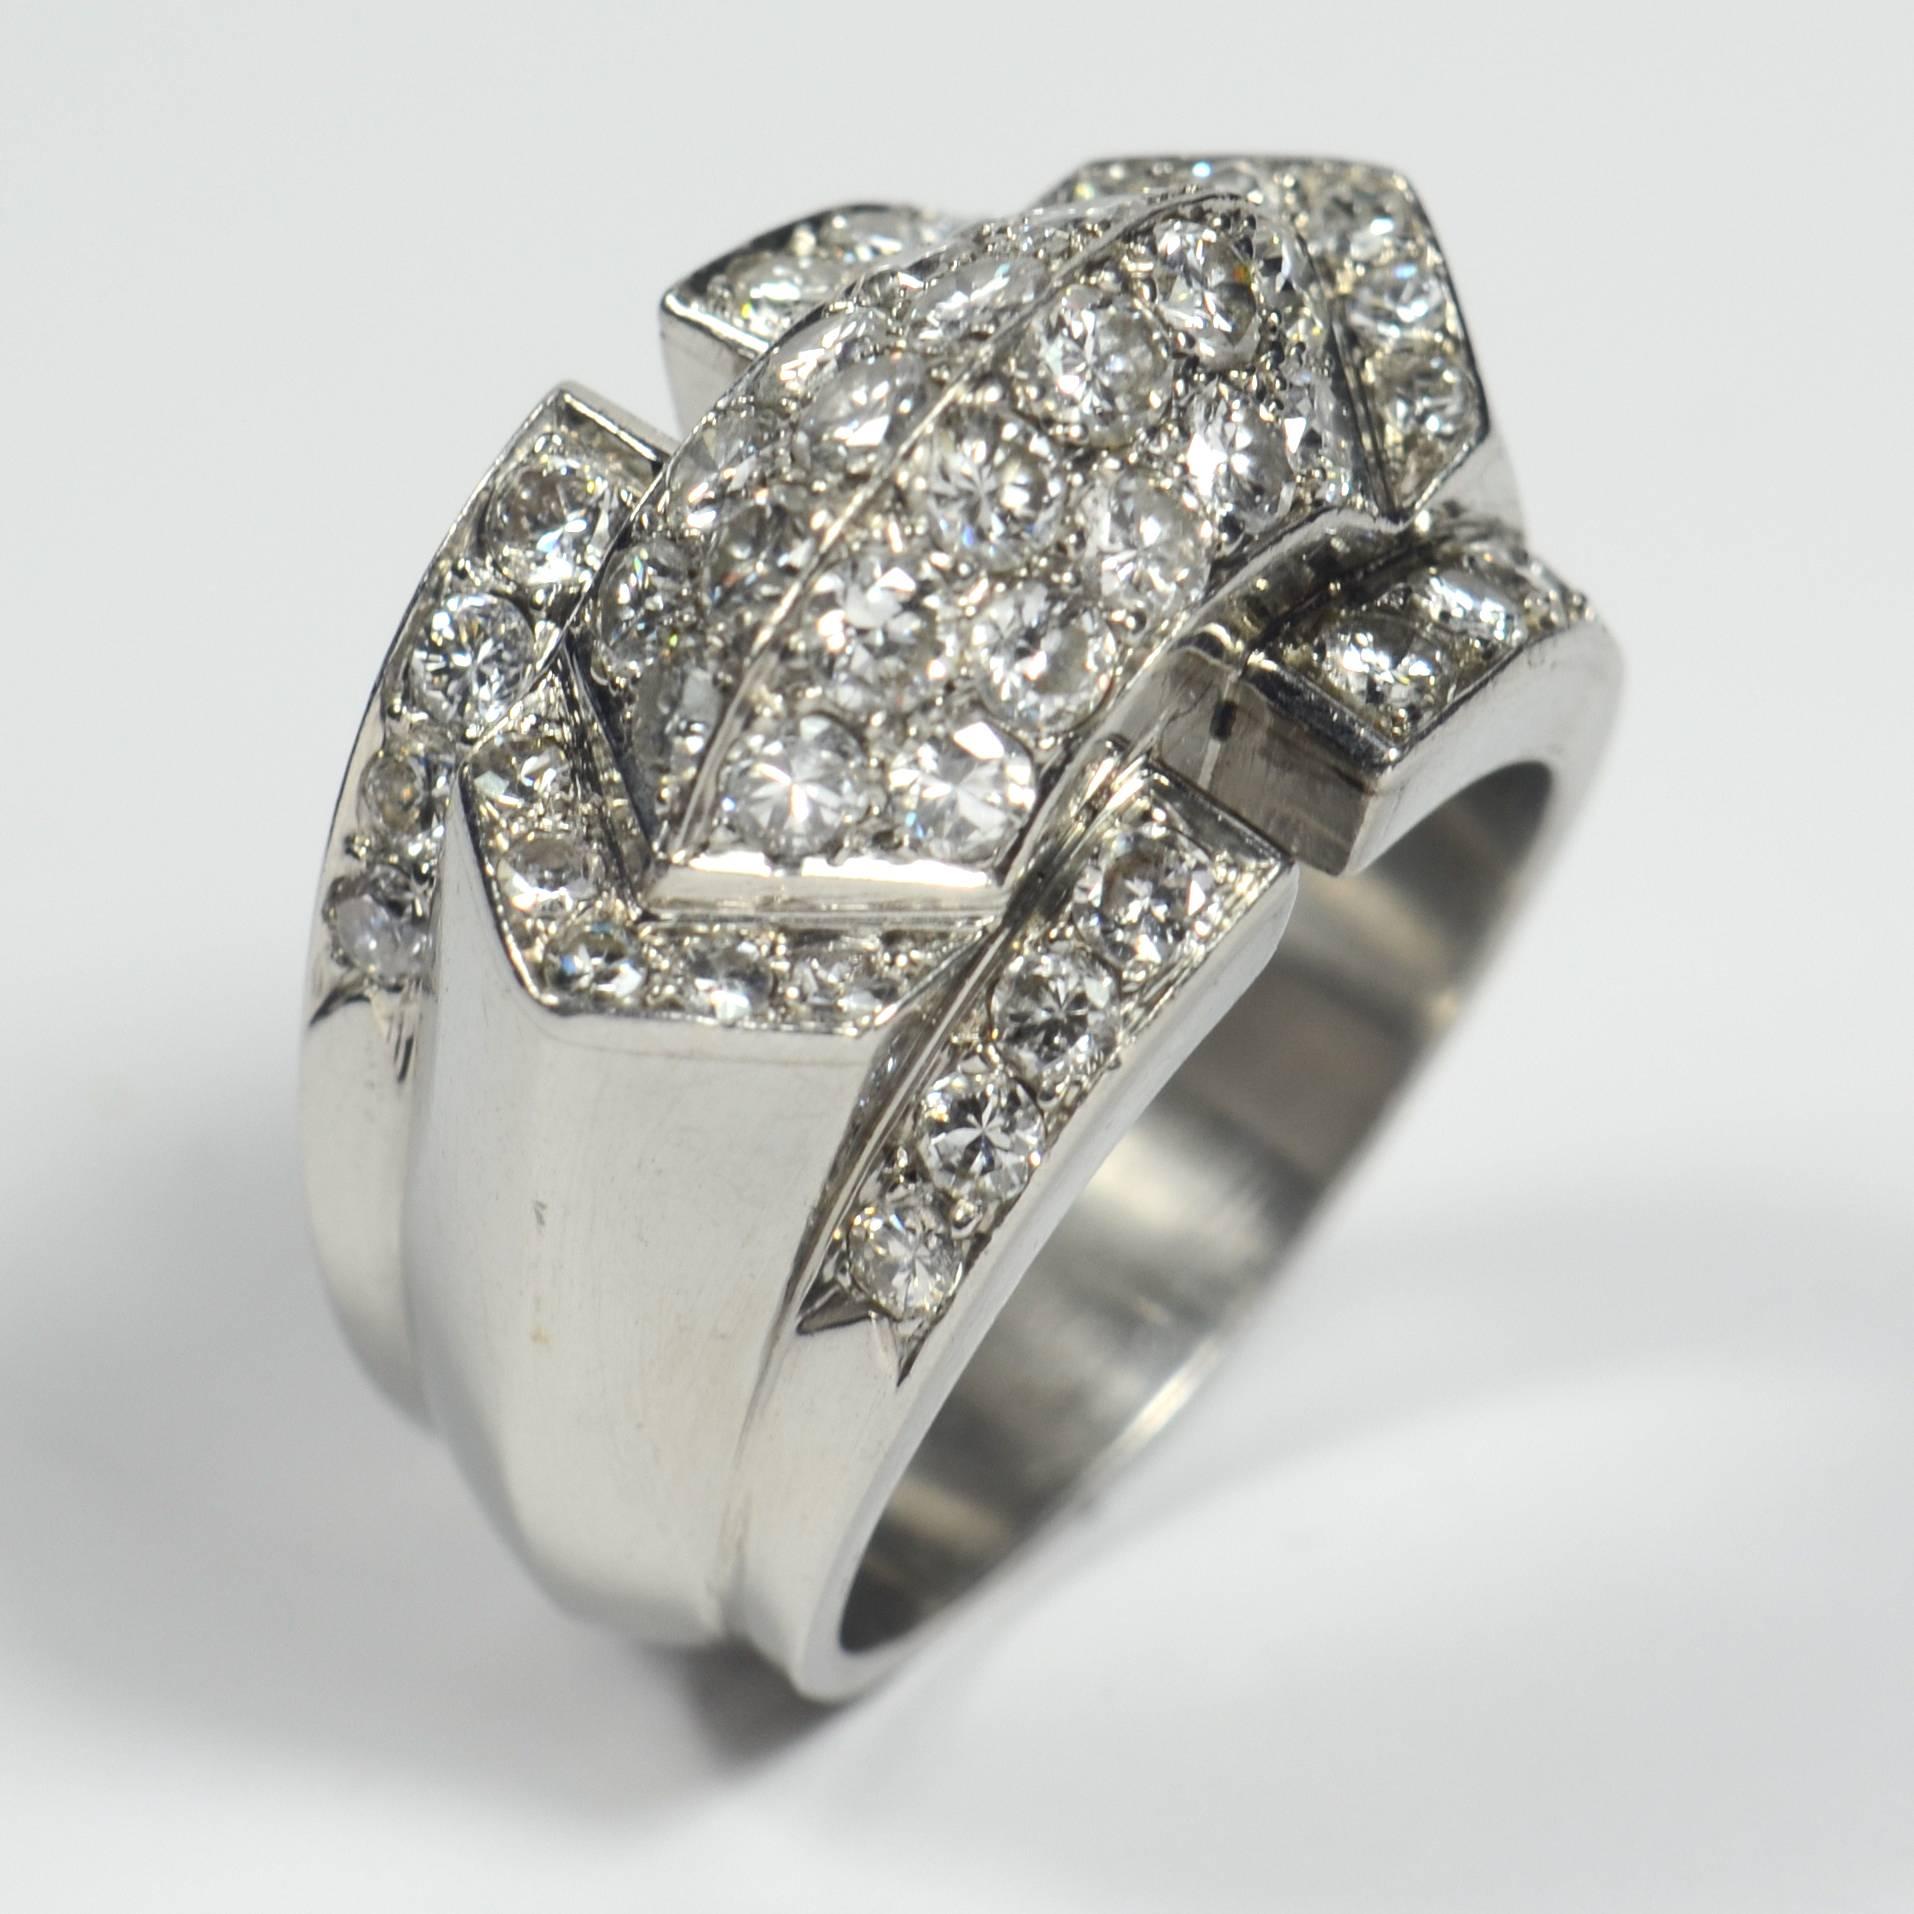 An immensely stylish platinum ring with architectural and geometric forms surmounted by a ridged diamond pavé-set bridge rising from a triangular shaped base inset with single cut diamonds. The shank tapers away from the top of the ring while